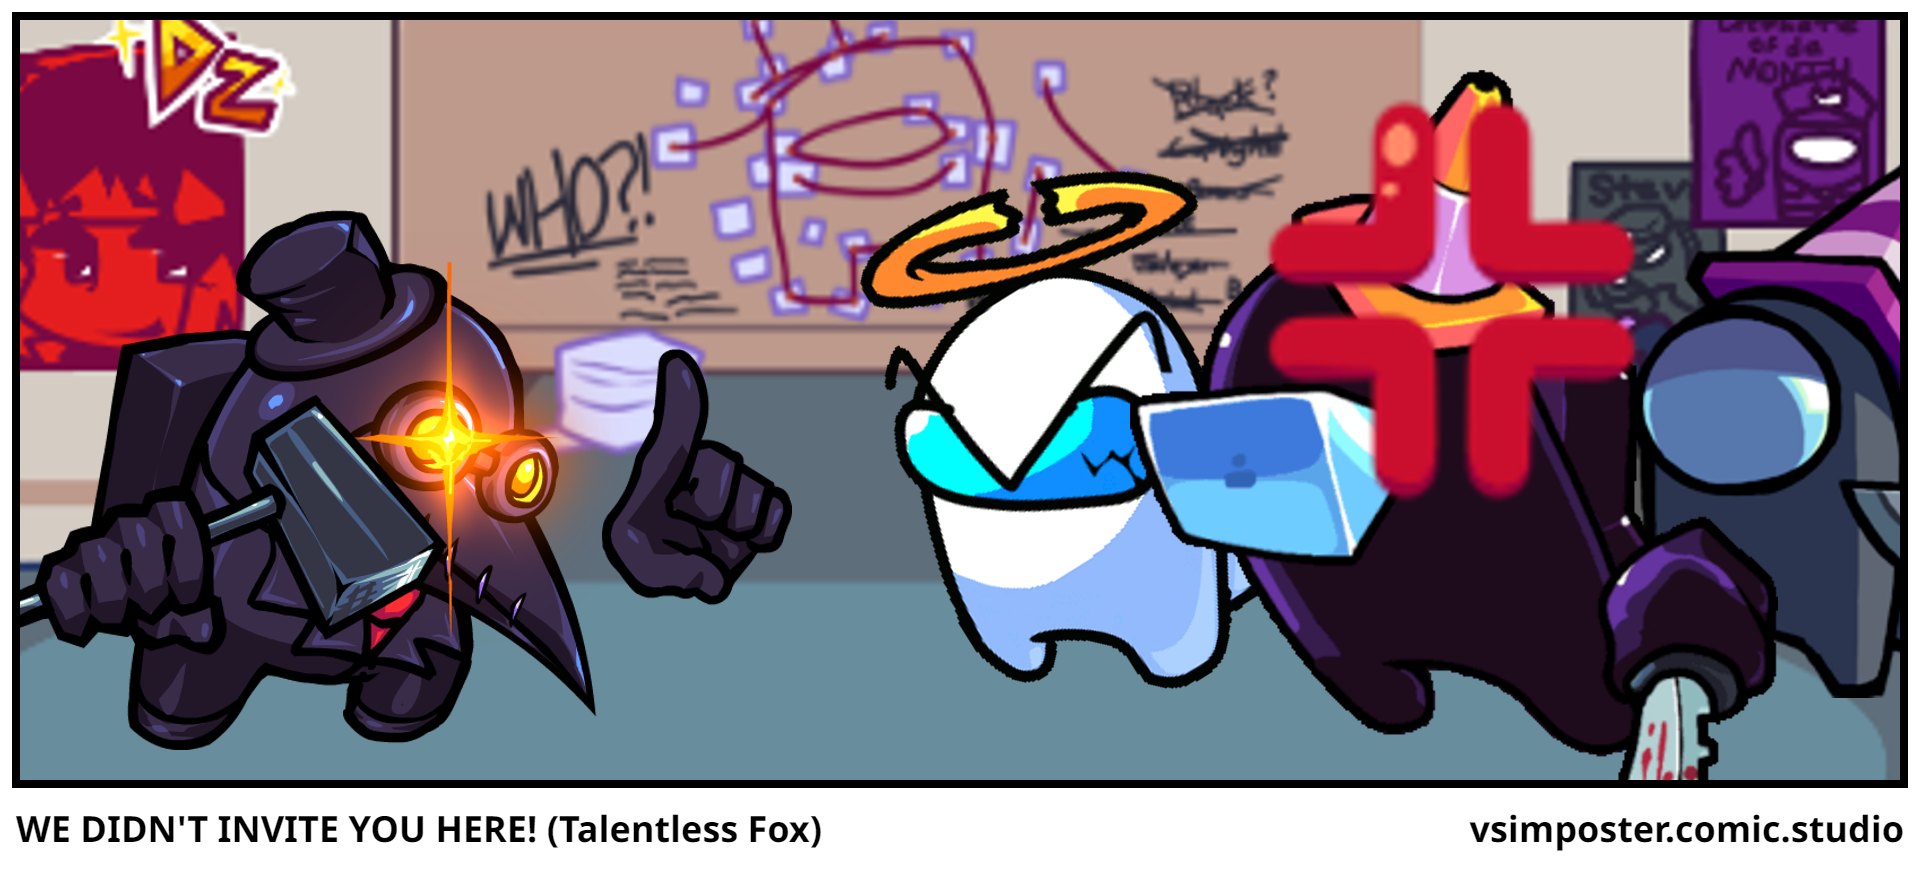 WE DIDN'T INVITE YOU HERE! (Talentless Fox)